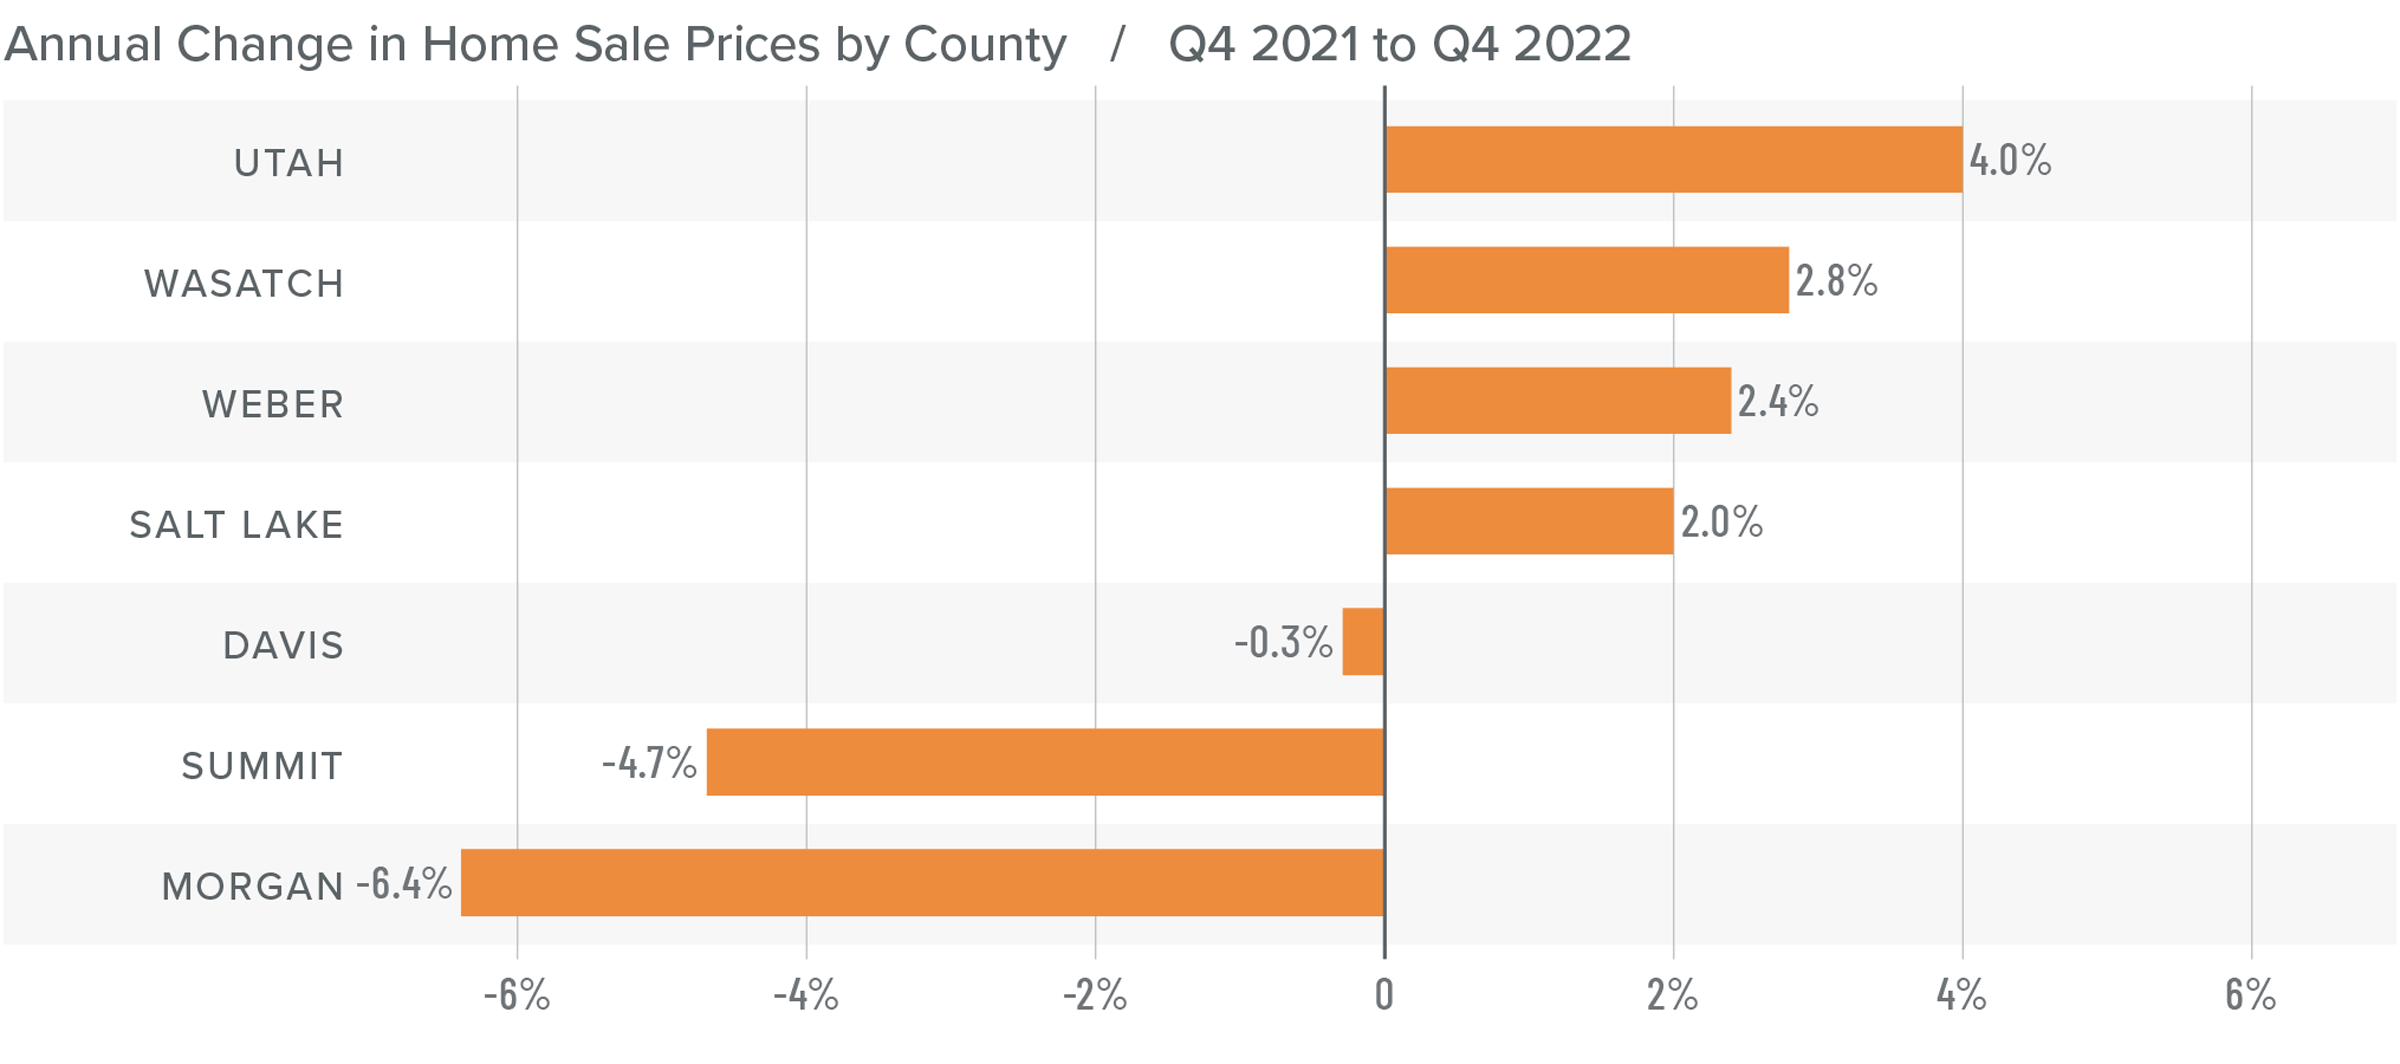 A bar graph showing the annual change in home sale prices for various counties in Utah from Q4 2021 to Q4 2022. Utah County tops the list at 4%, followed by Wasatch at 2.8%, Weber at 2.4%, Salt Lake at 2.0%, Davis at 0.3%, Summit at -4.7%, and Morgan at -6.4%.